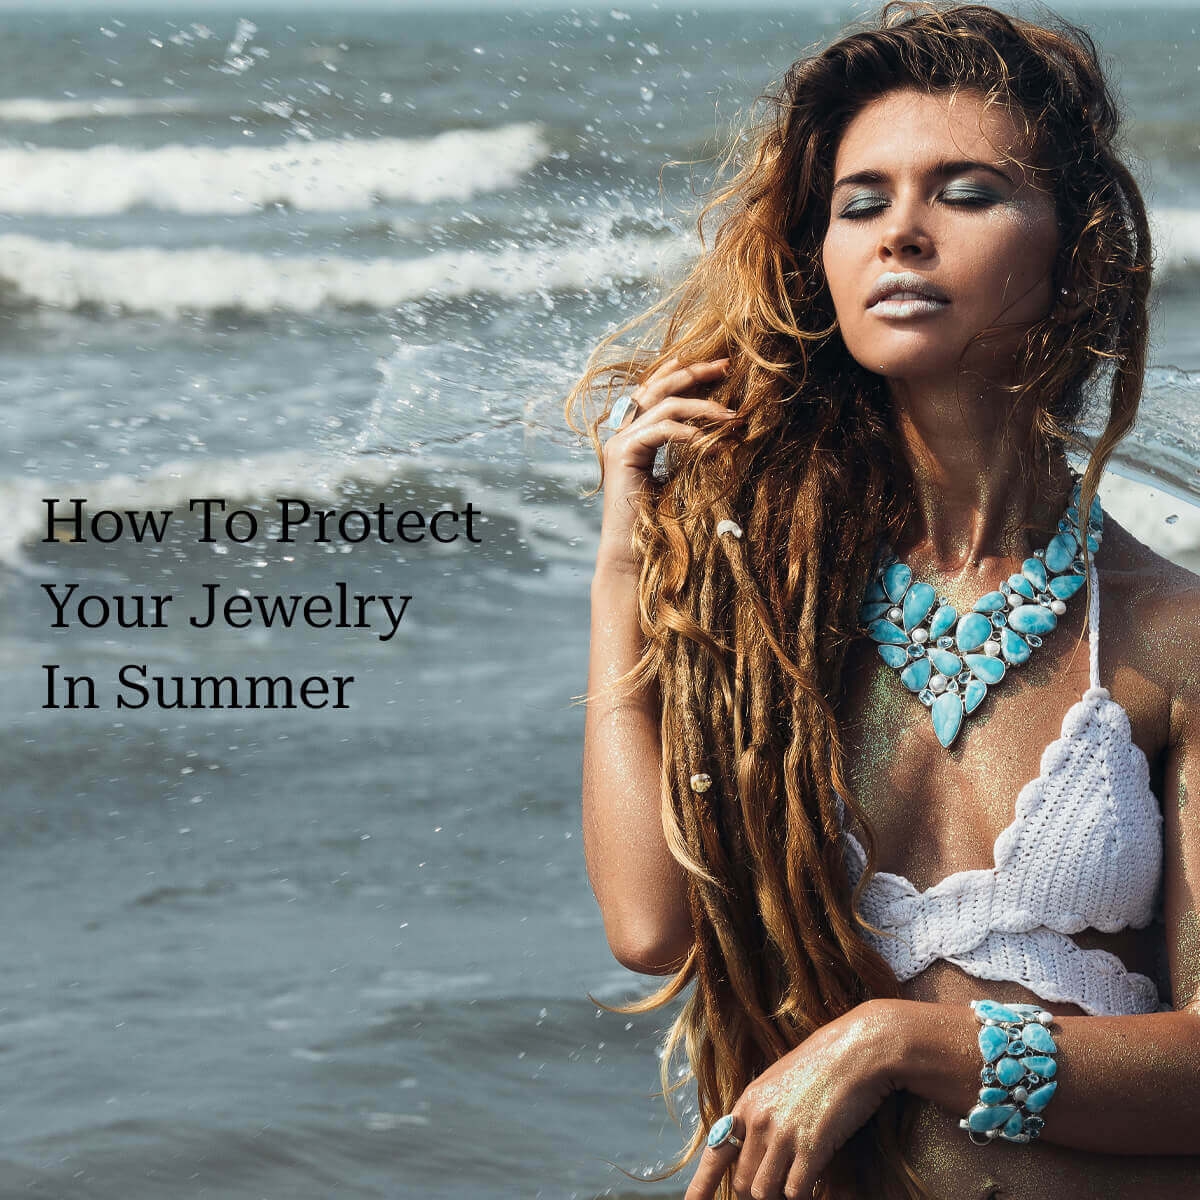 How To Protect Your Jewelry In Summer